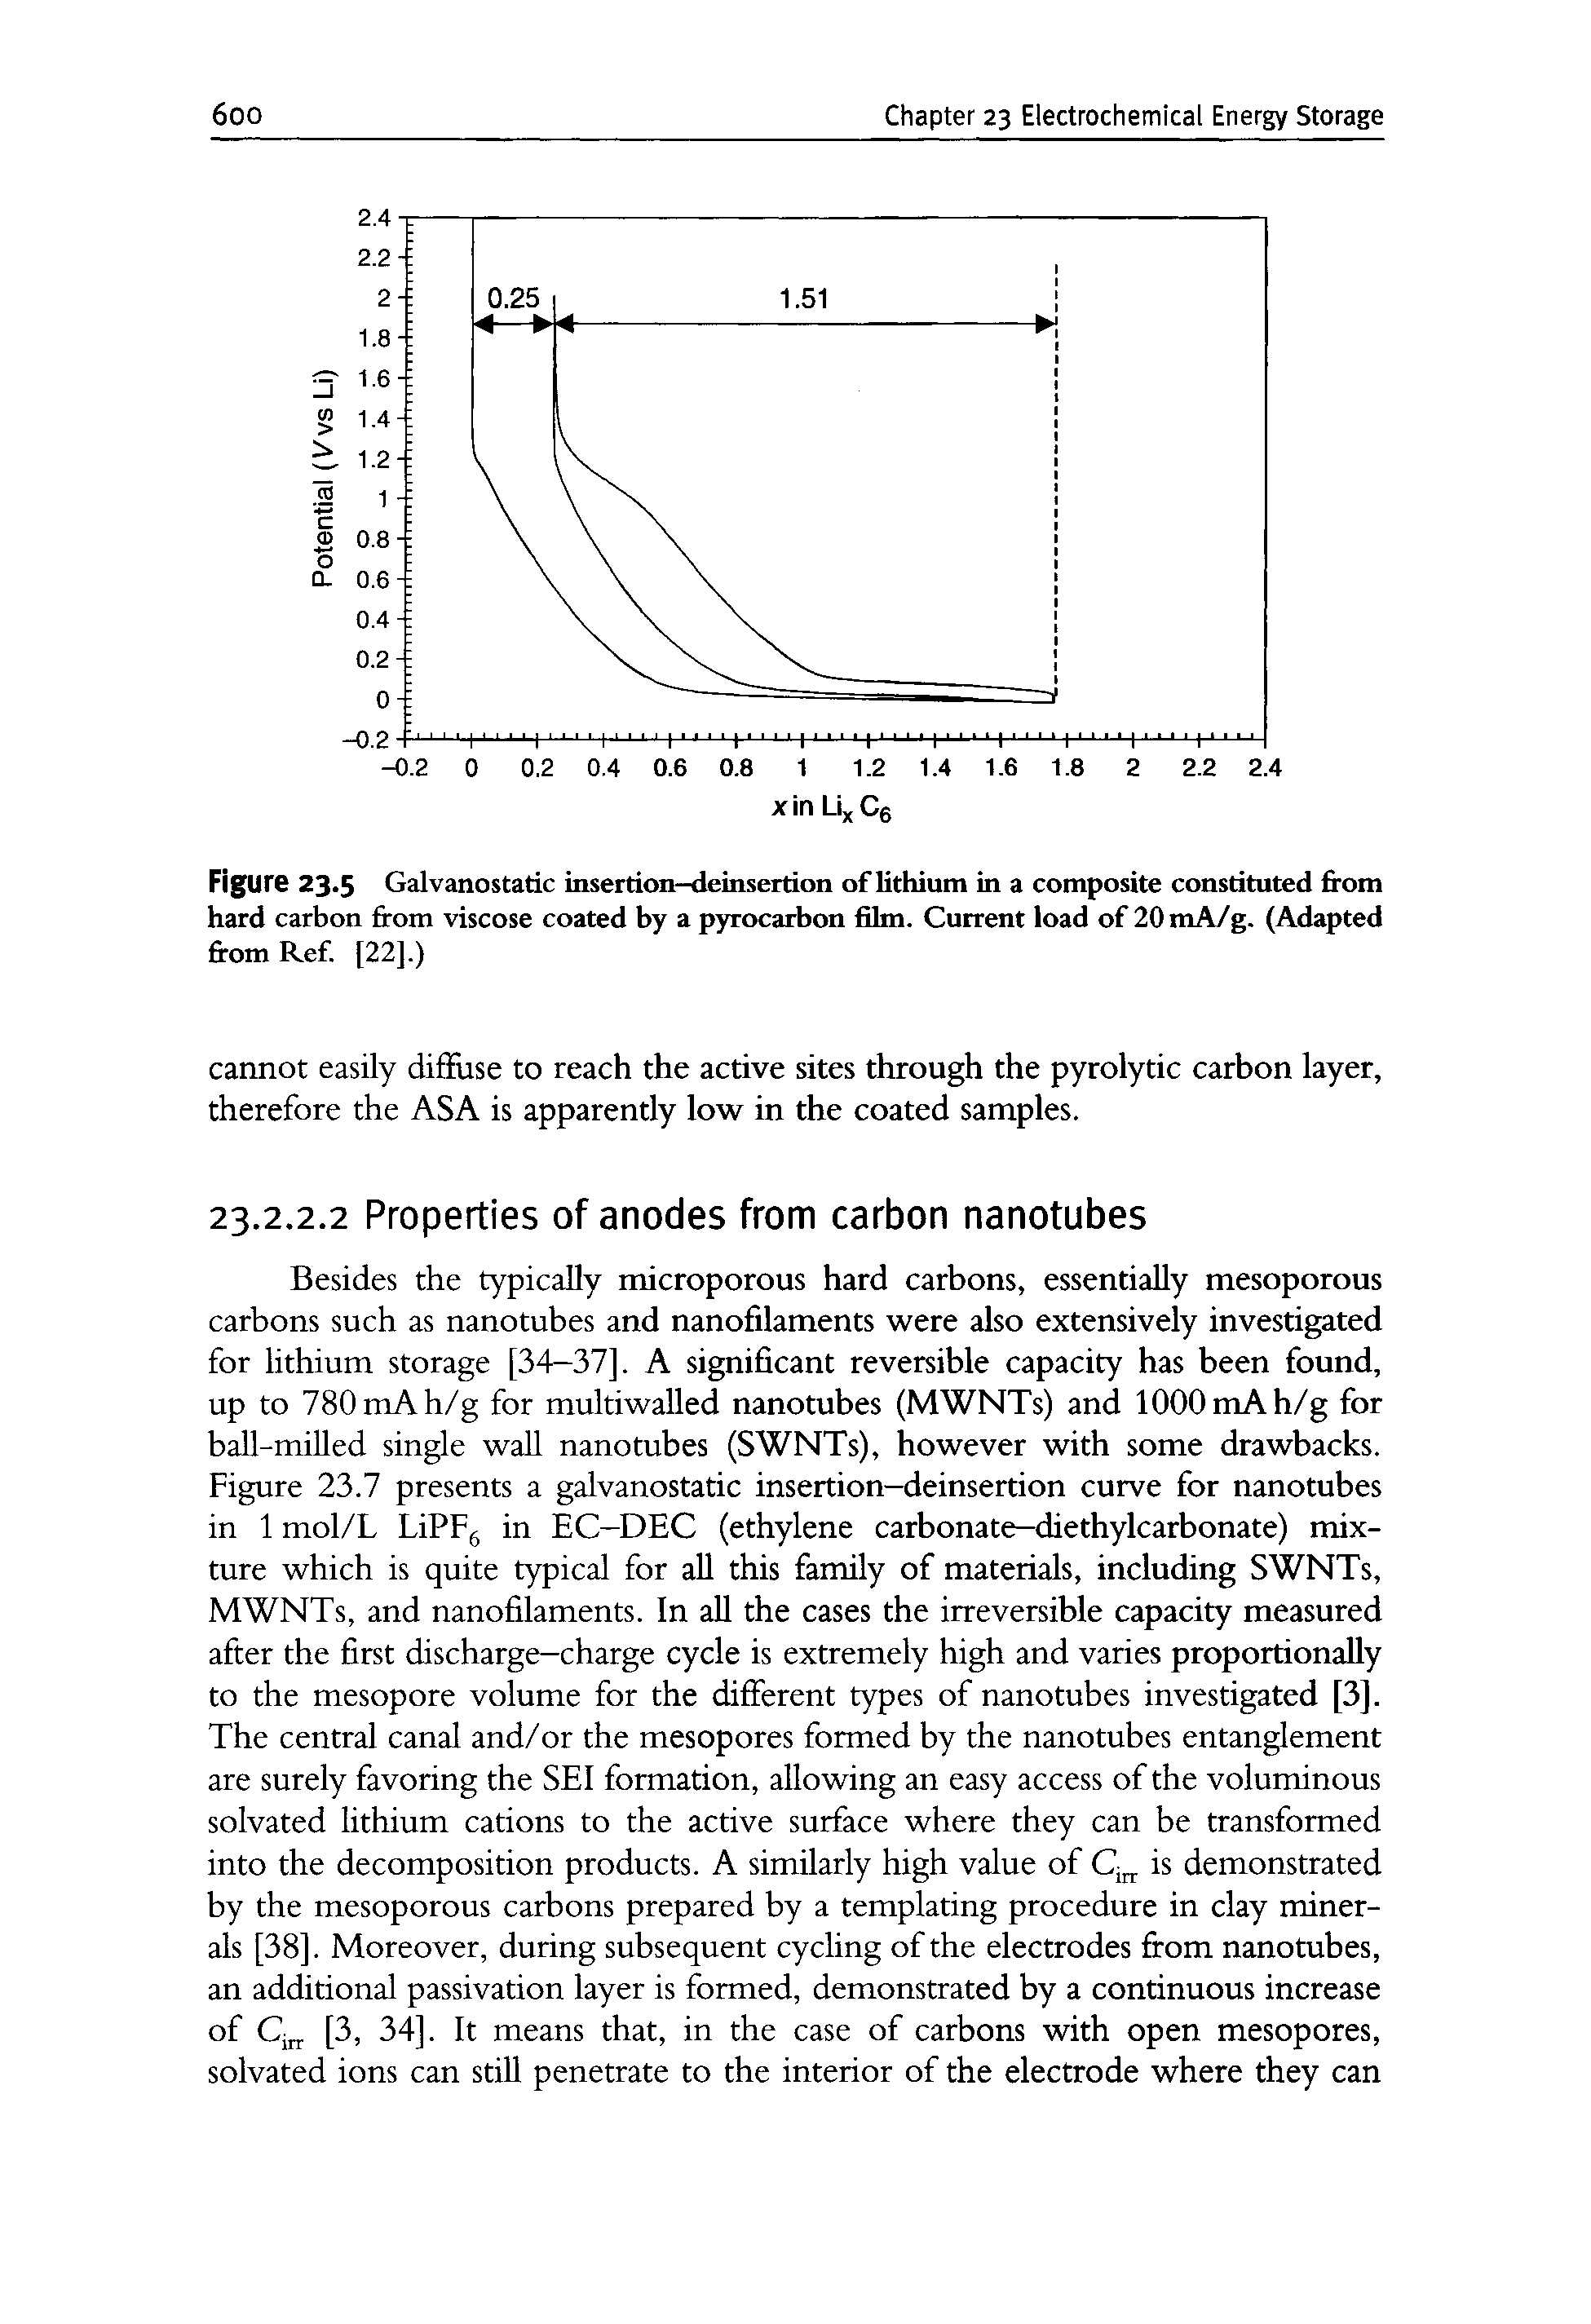 Figure 23.5 Galvanostatic insertion-deinsertion of lithium in a composite constituted from hard carbon from viscose coated by a pyrocarbon film. Current load of 20mA/g. (Adapted from Ref. [22].)...